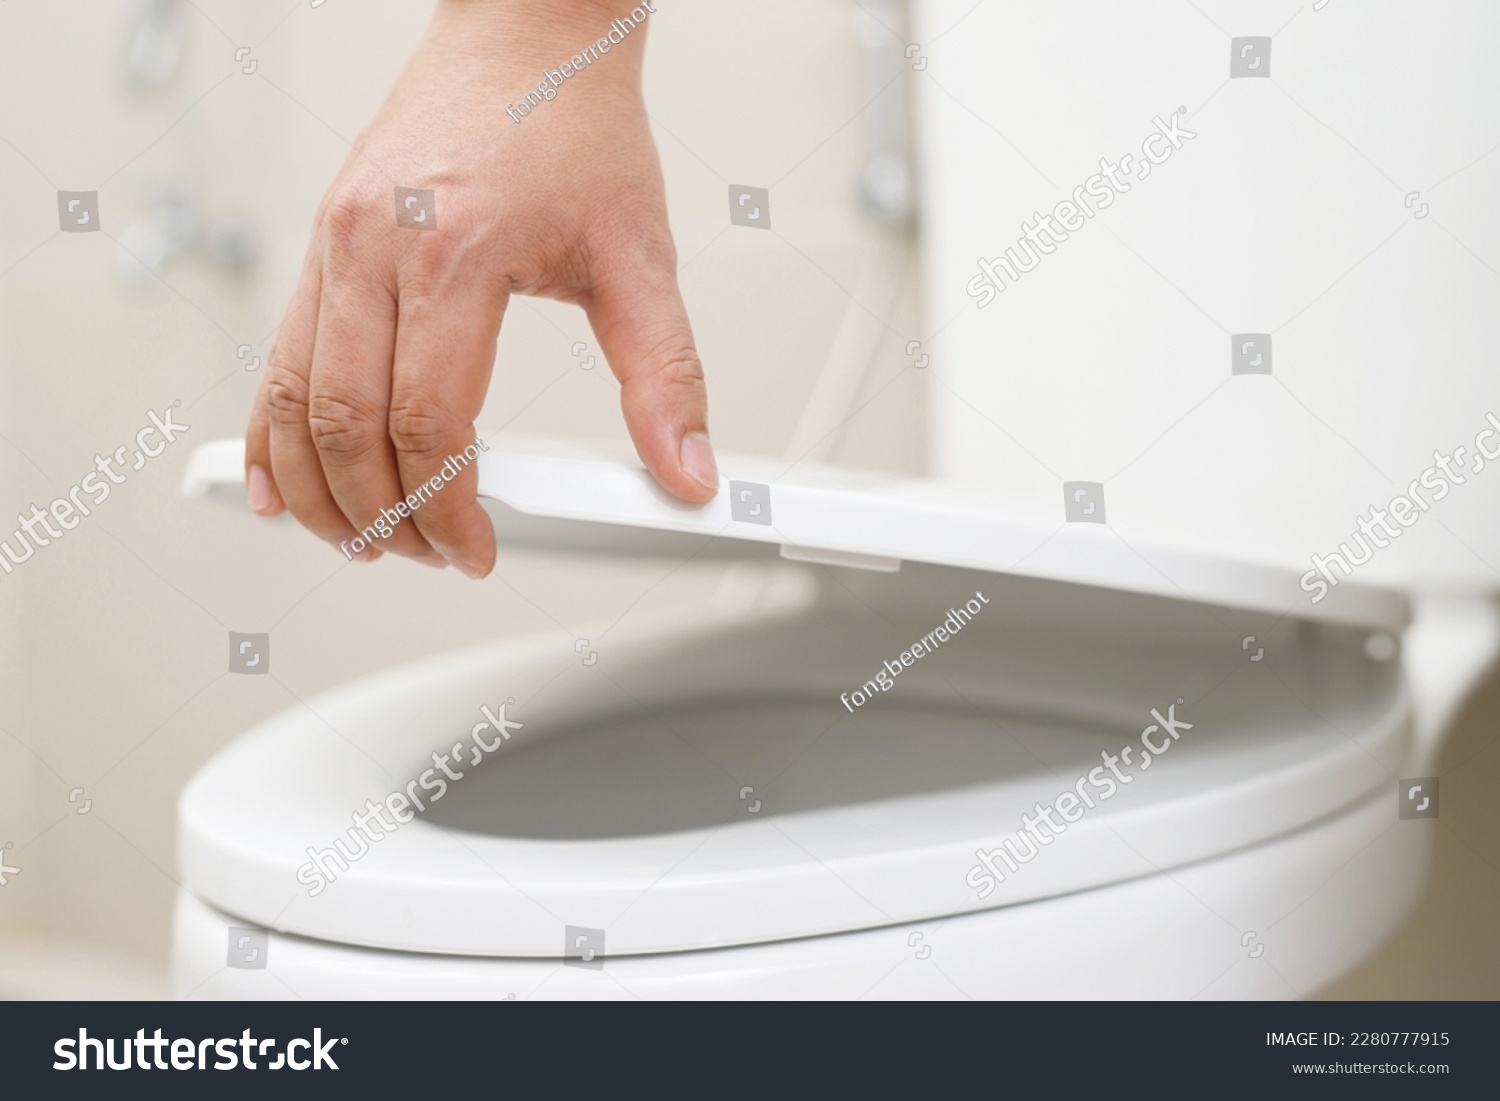 close up hand of a woman closing the lid of a toilet seat. Hygiene and health care concept. #2280777915